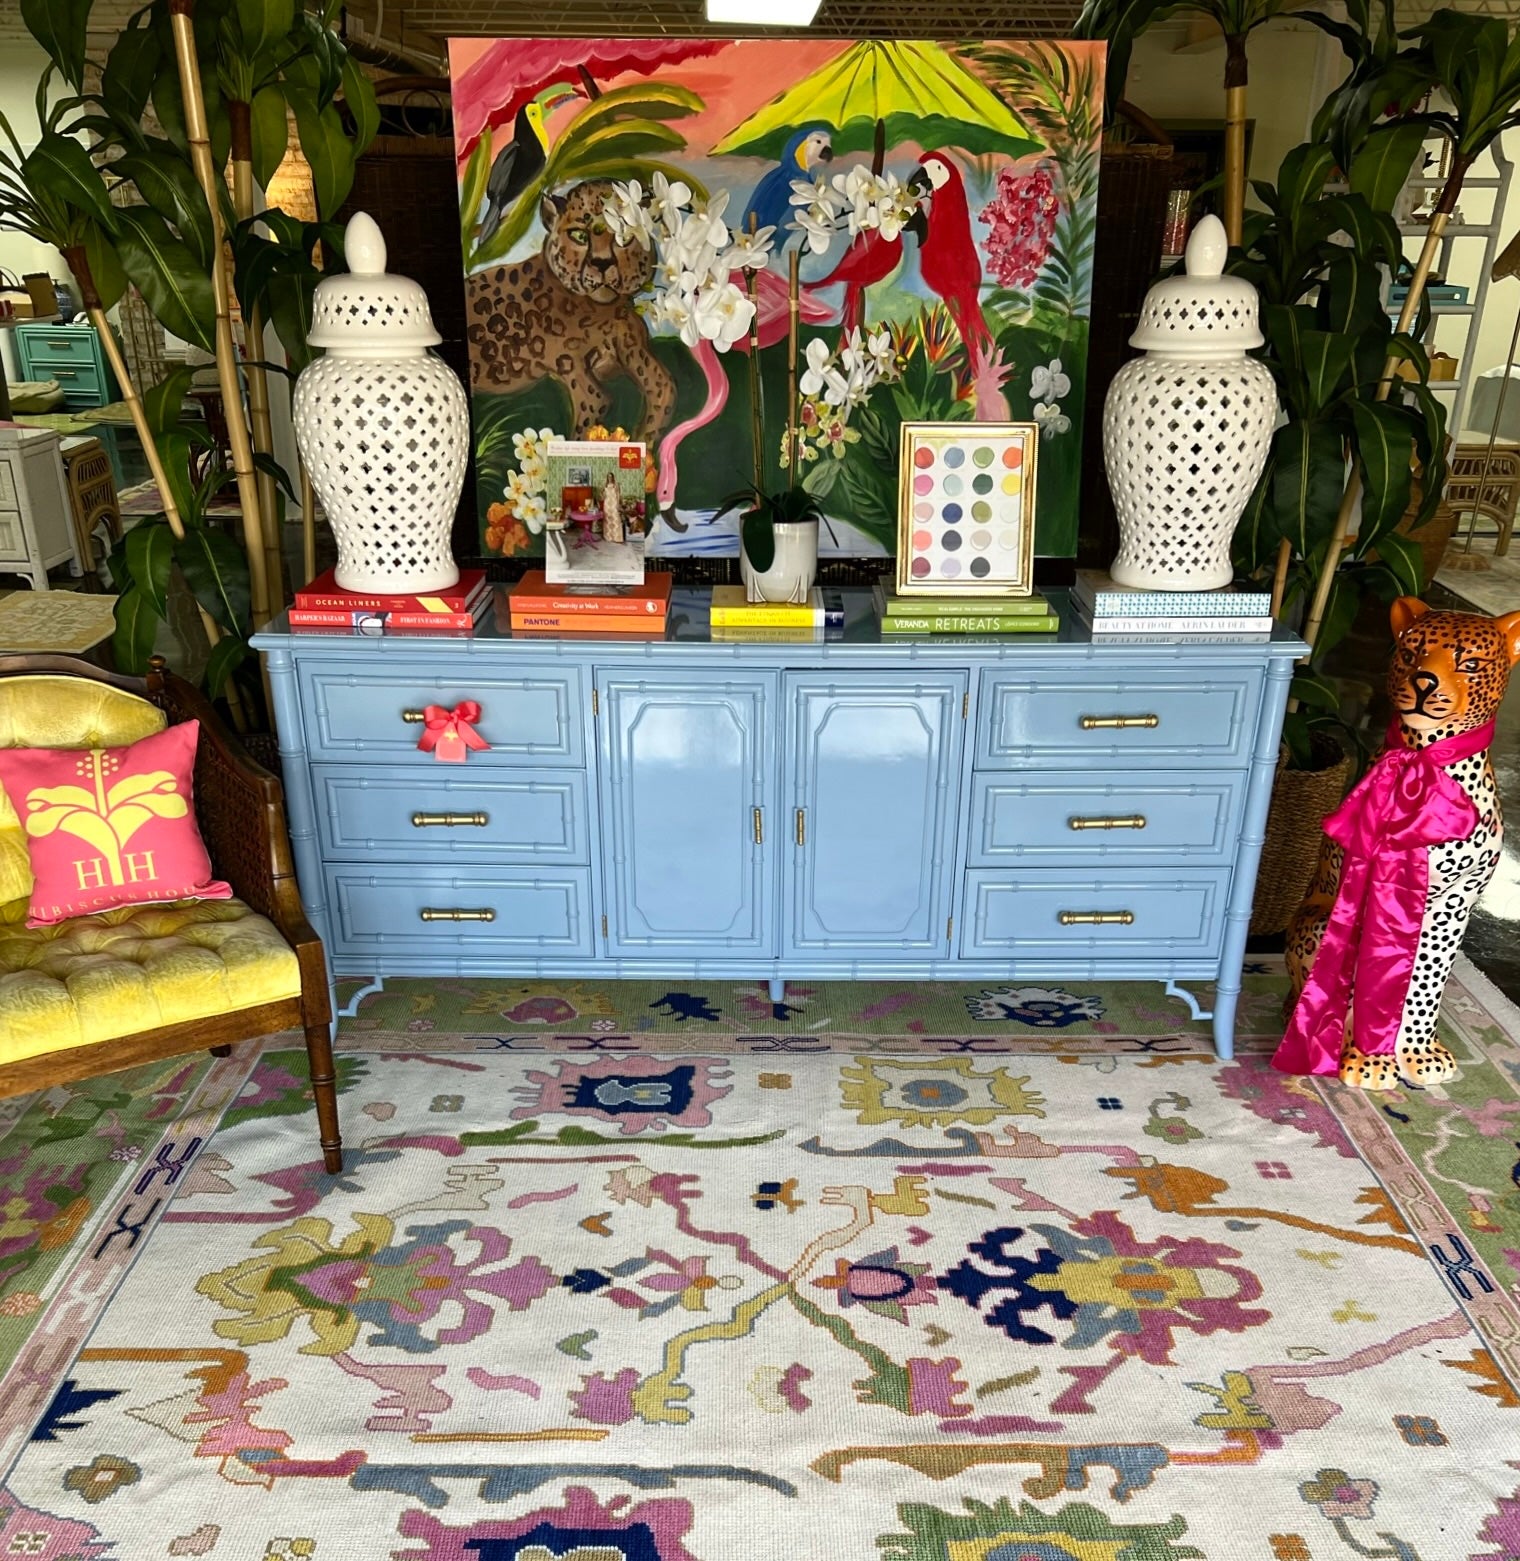 Vintage Dixie Furniture Company "Aloha" Collection Credenza Lacquered in Denim Wash and Ready to Ship!